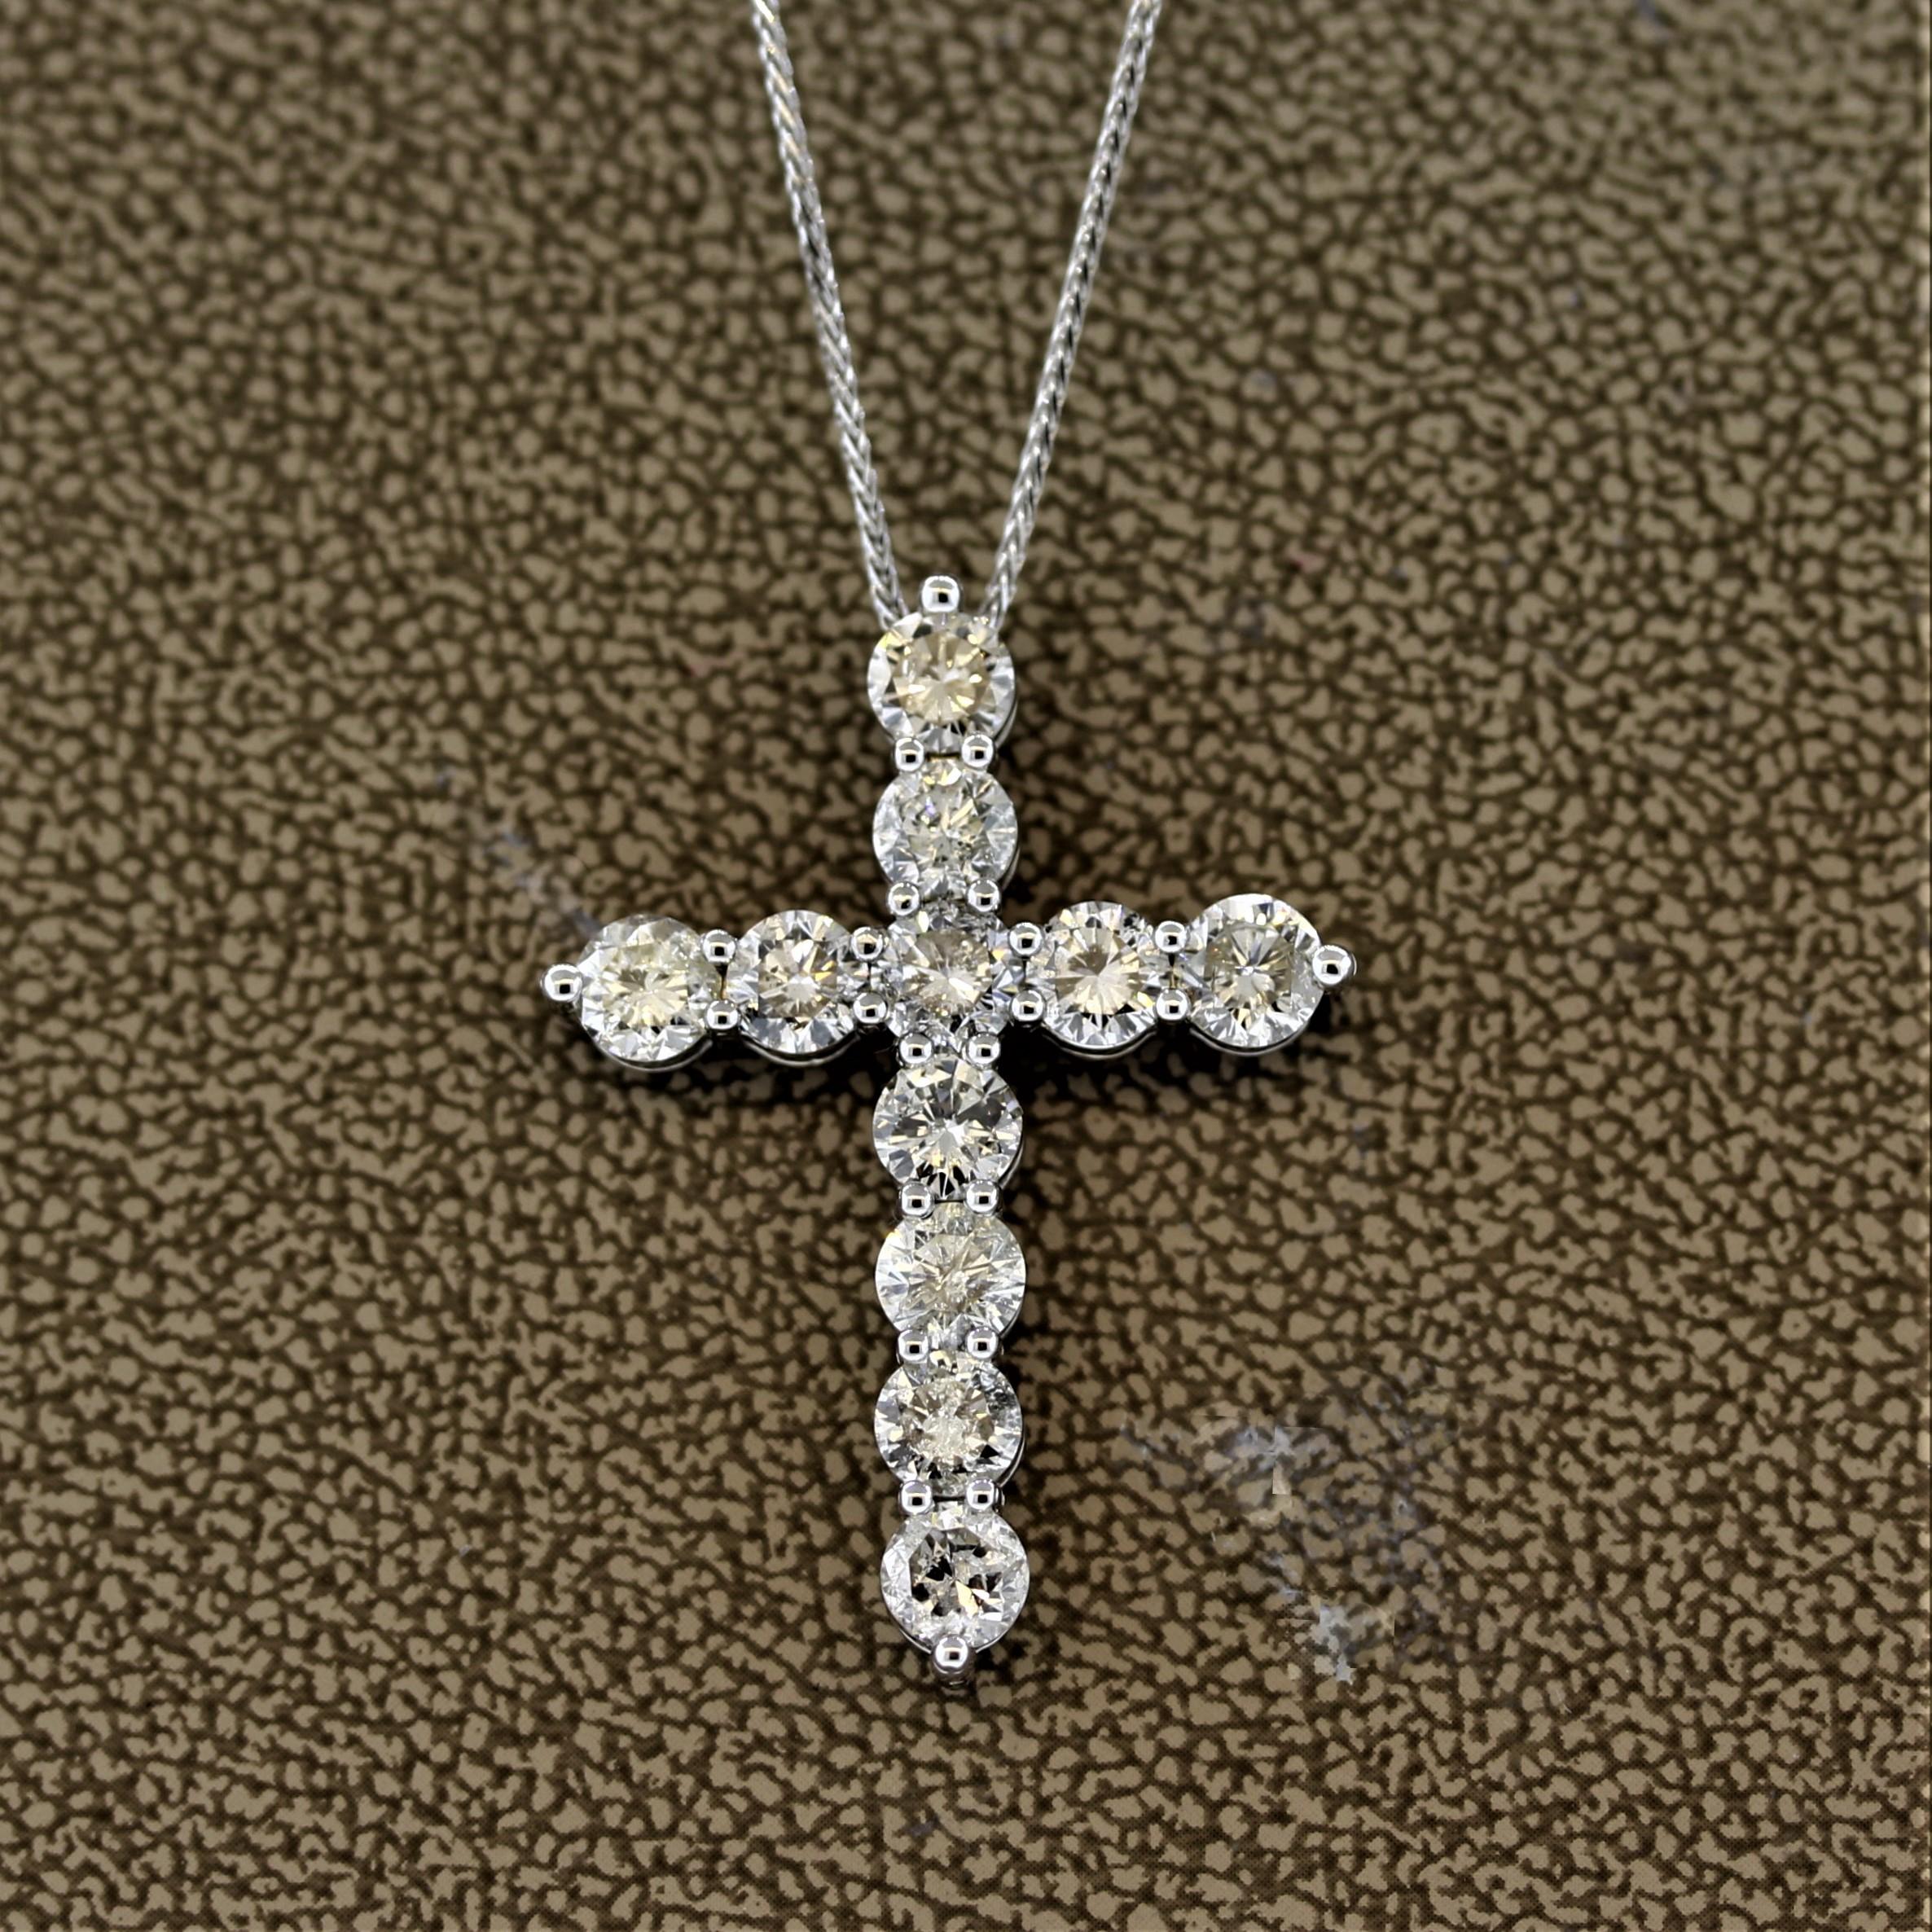 A classic cross necklace featuring larger than normal diamonds. There are 11 round brilliant cut diamonds weighing a total of 3.60 carats. Set safely into 14k white gold and comes with a matching white gold necklace.

Cross Length: 1.25